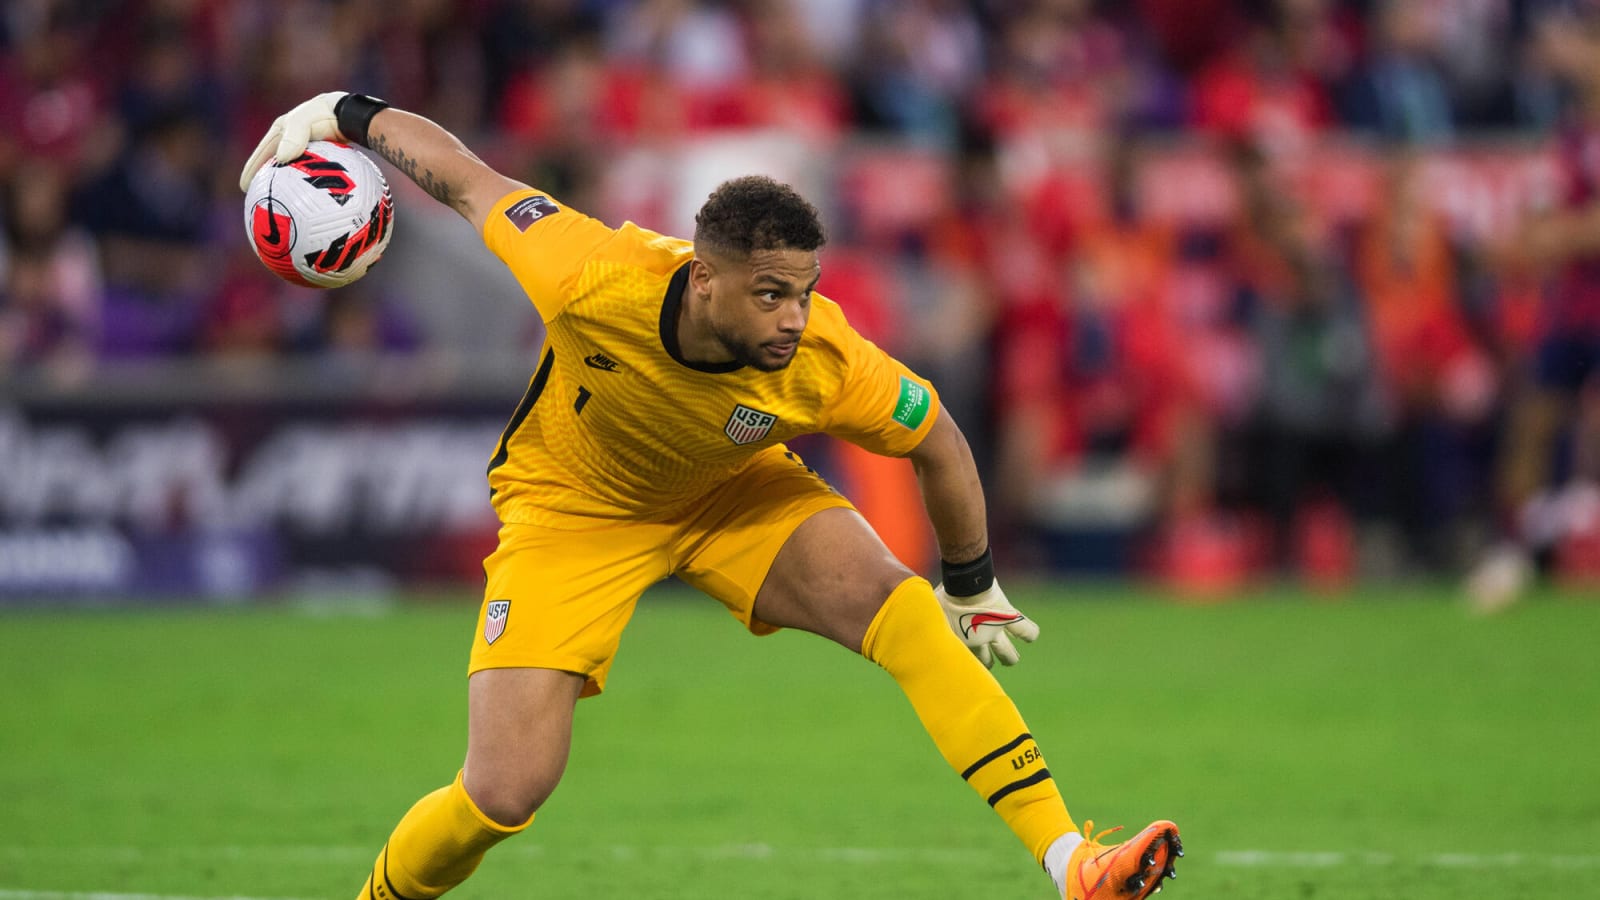 Zack Steffen is reportedly close to sealing a move from Manchester City